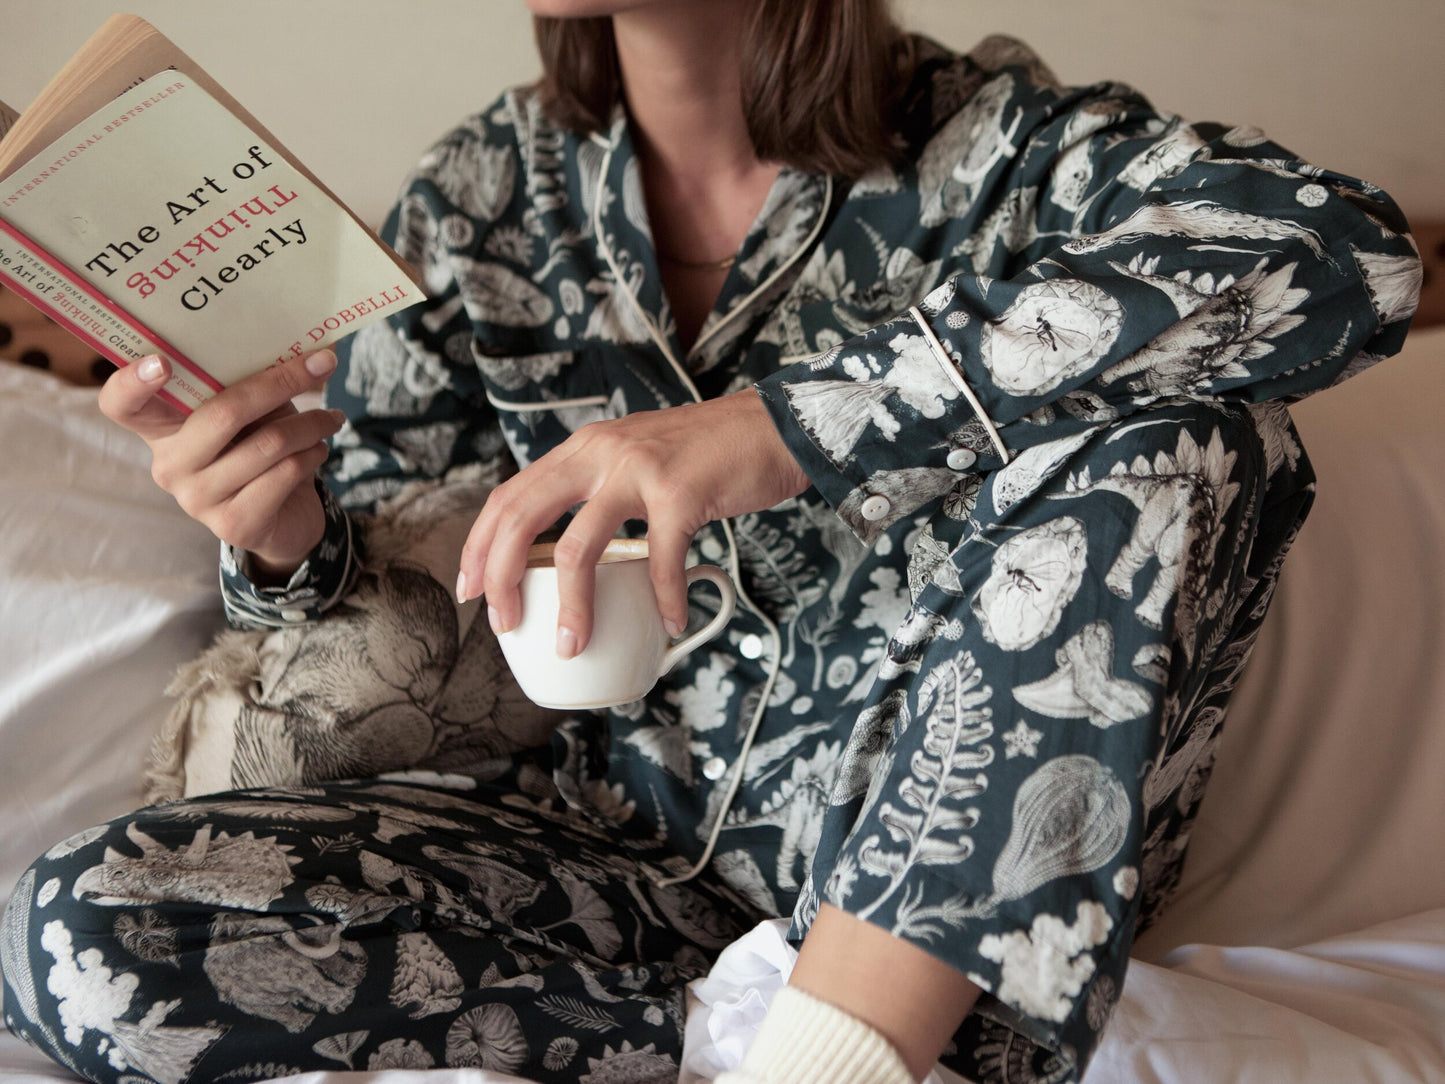 This high-quality womens Pj features the beautiful prehistoric dinosaurier illustrations by tattoo artist Suflanda. It coomes with boxy shaped long-sleeve shirt and long pants with Elasticated waist with drawstring.